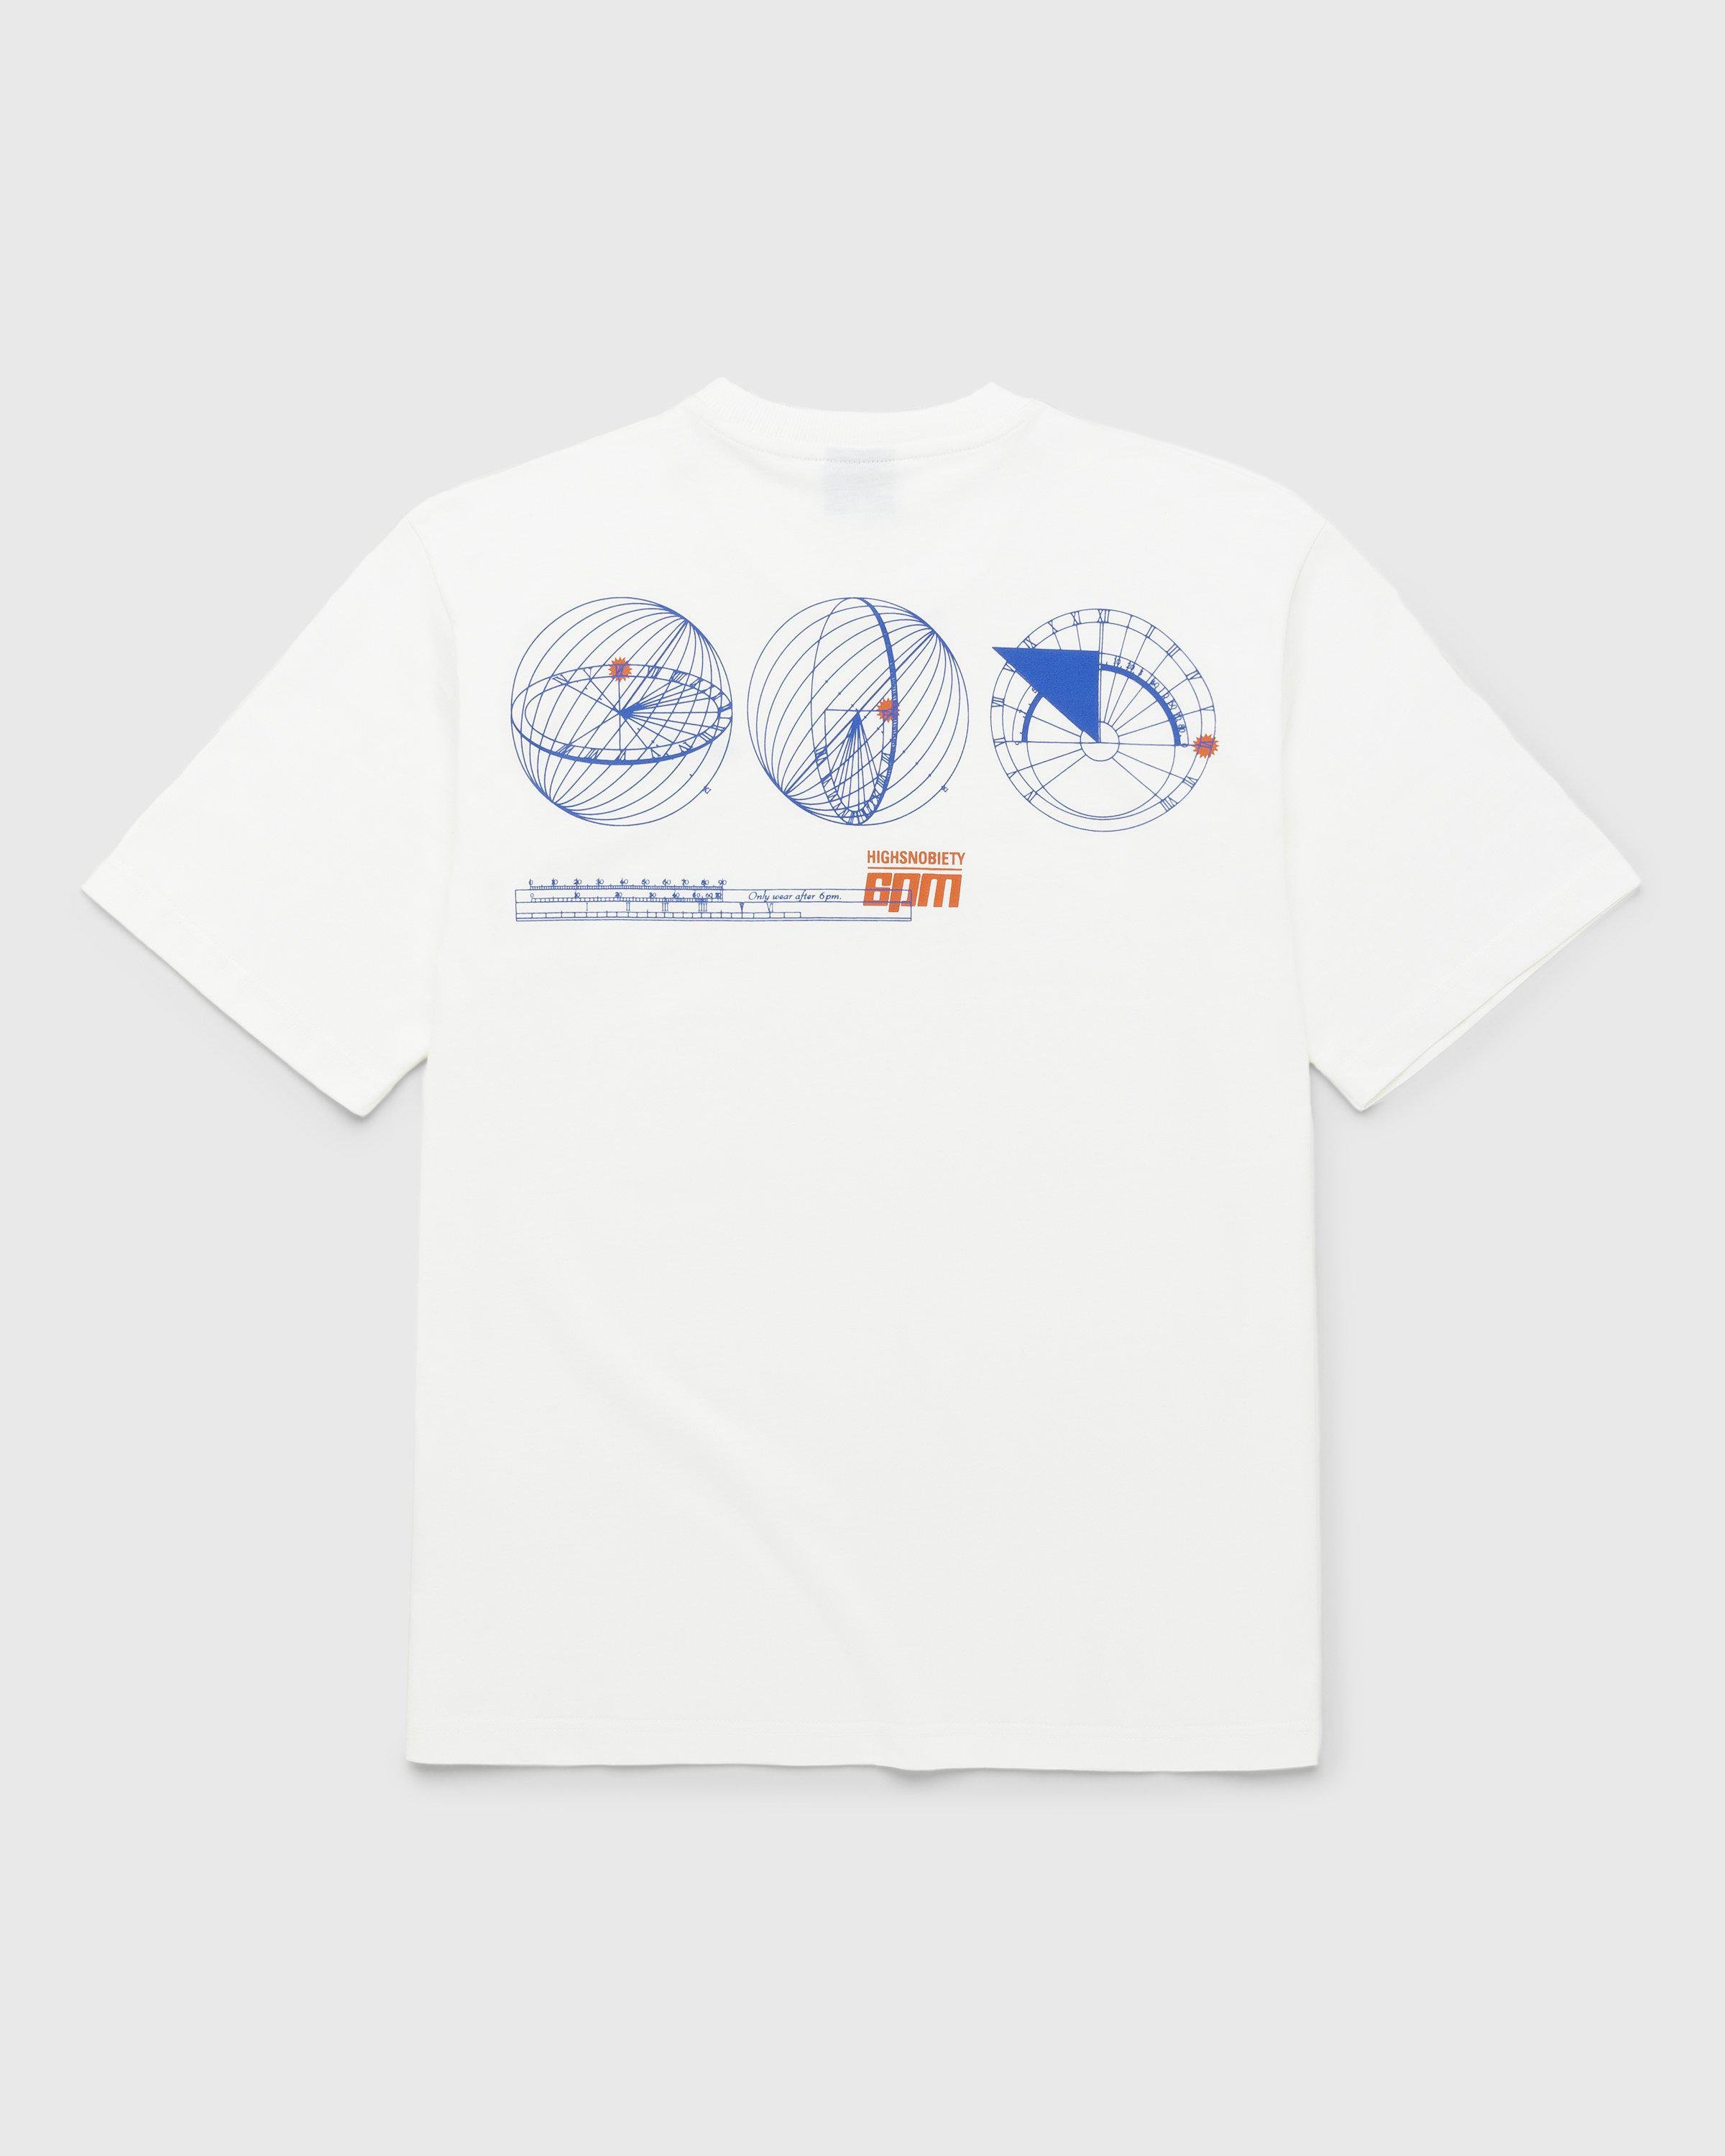 BERLIN, BERLIN 3 Only Wear After 6PM T-Shirt White by 6PM X HIGHSNOBIETY